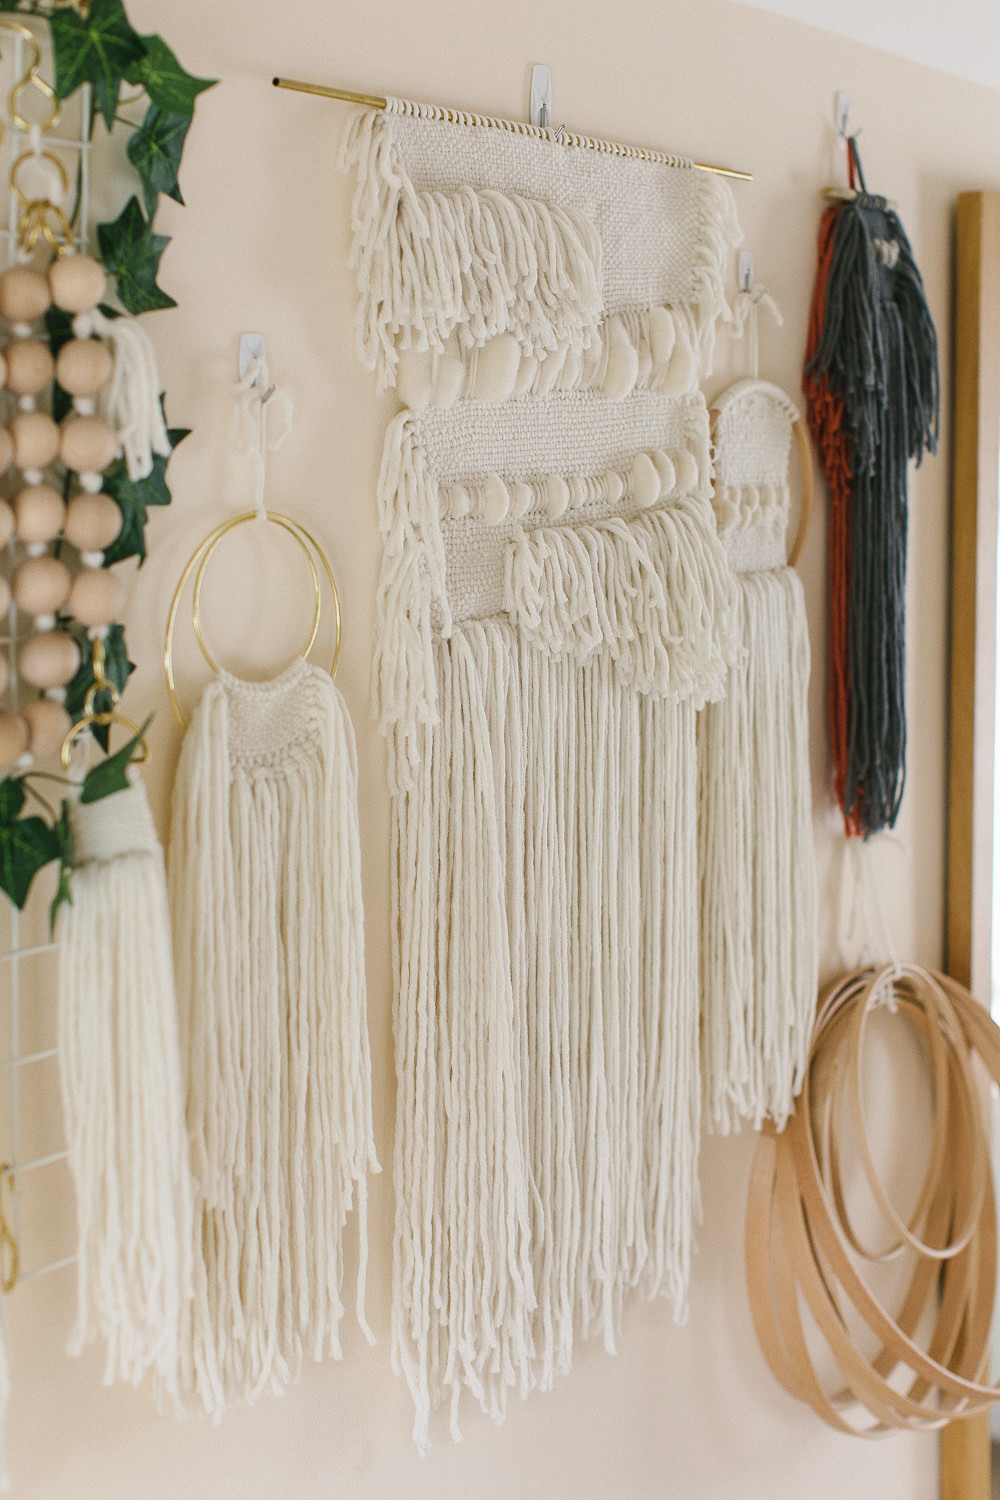 Boho wall hangings and dream catchers from Bamaluz Home